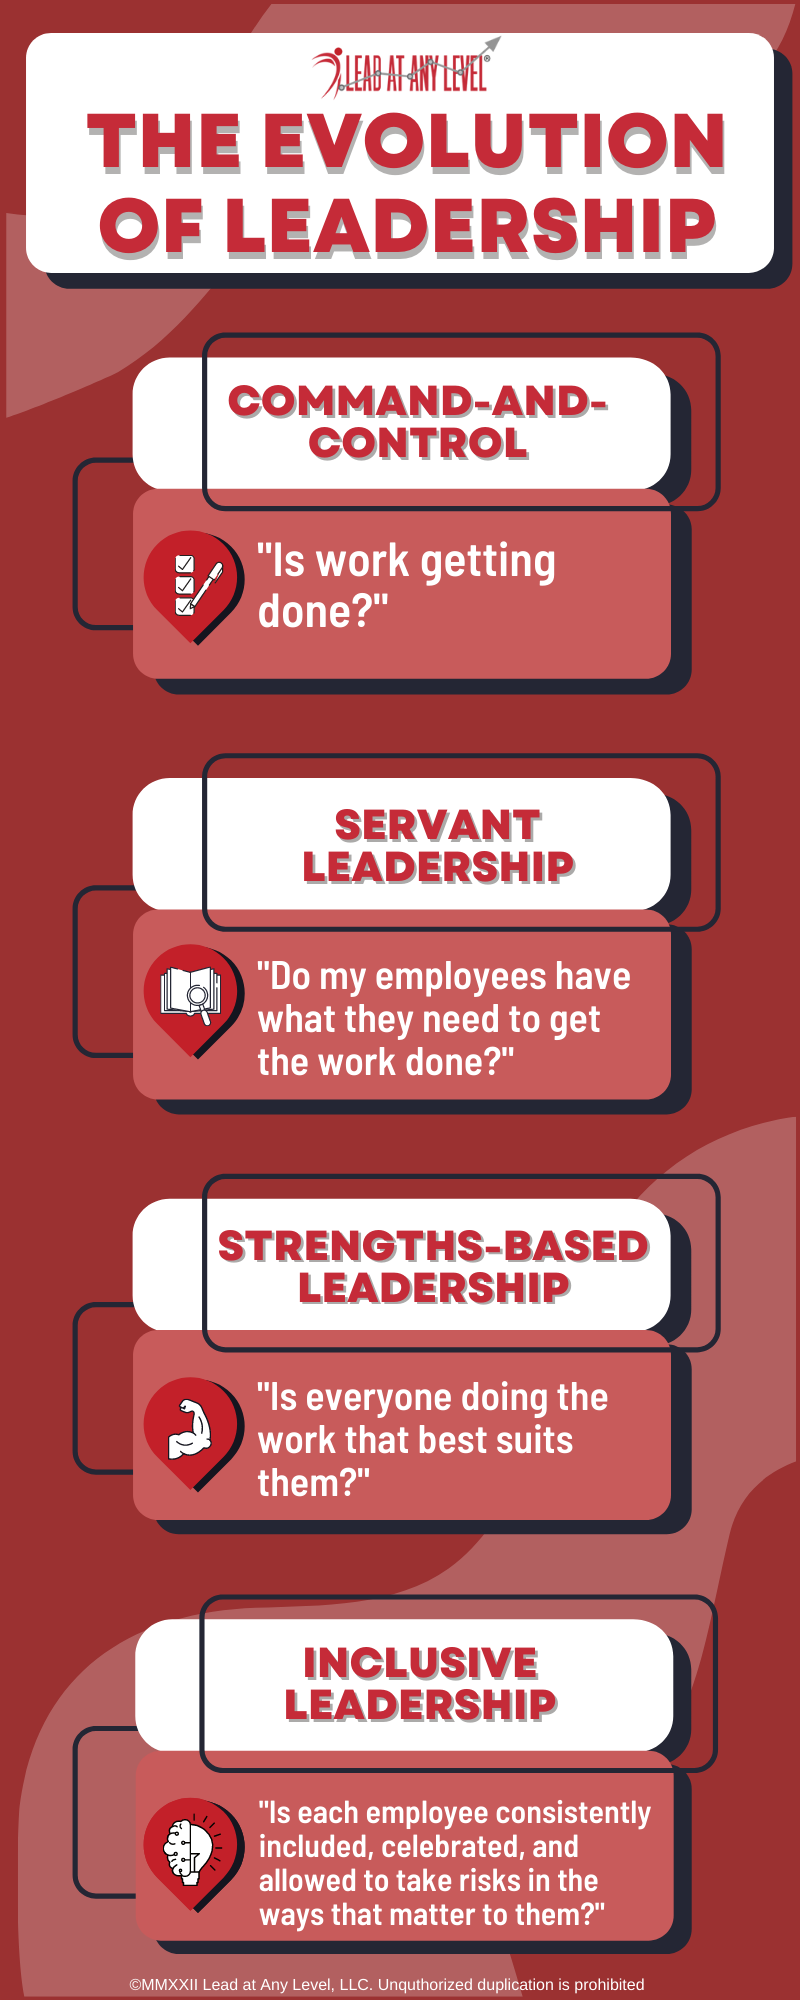 Leadership Evolution: Command-and-control leaders ask only “Is work getting done?”
Servant leaders ask “Do my employee have what they need to get the work done?
Strengths-based leaders ask, “Is everyone doing the work that best suits them?”
Inclusive leaders ask, “Is each employee consistently included, celebrated, and allowed to take risks in ways that matter to them?”